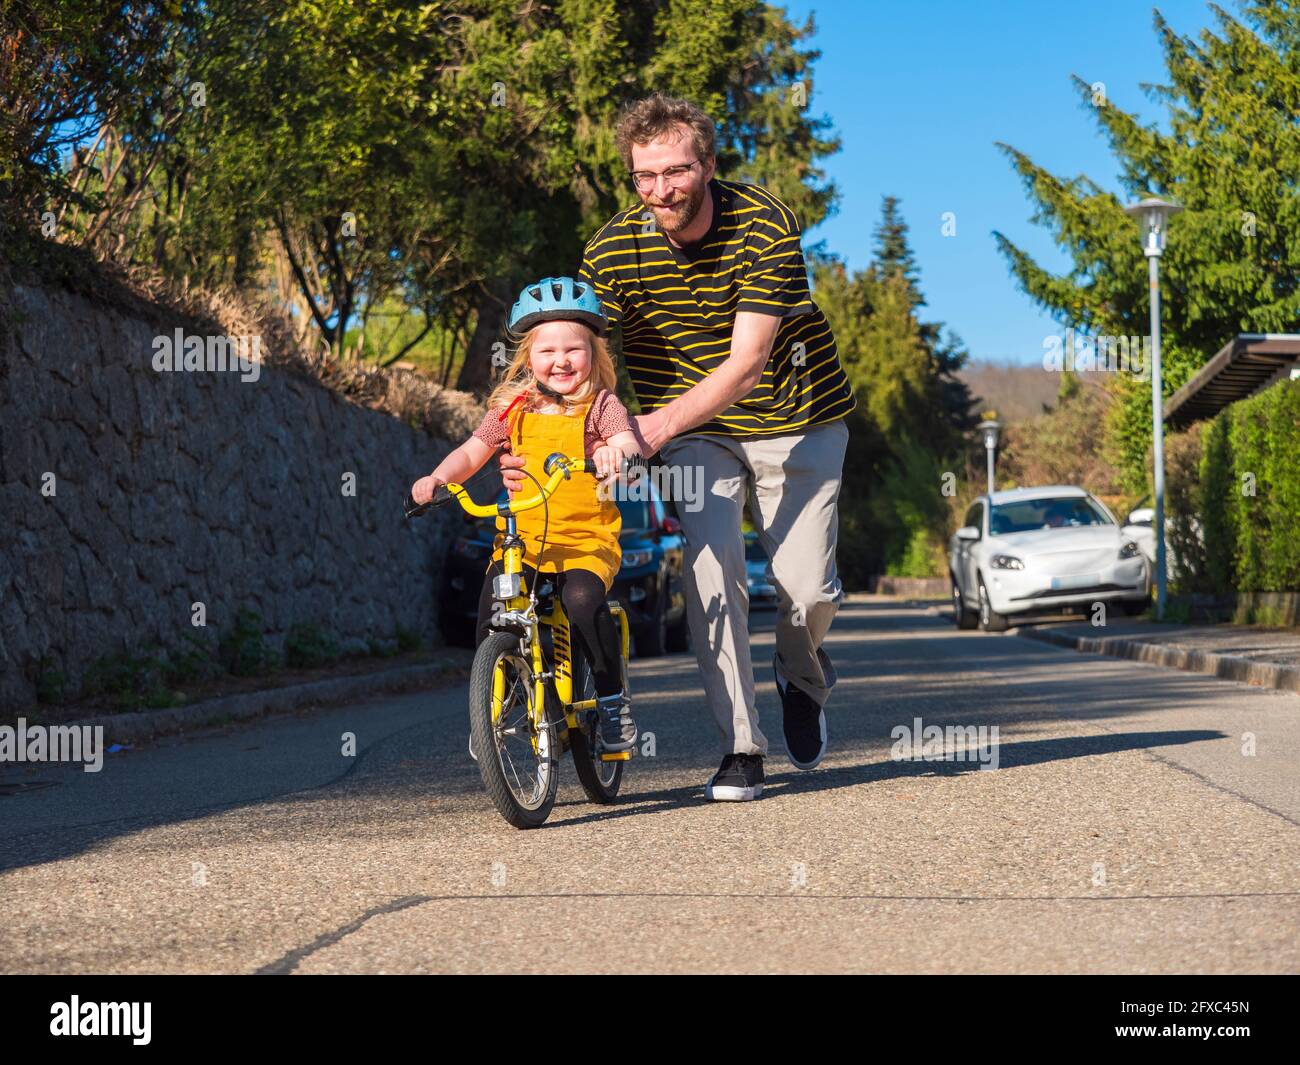 Smiling father assisting daughter while cycling on road Stock Photo